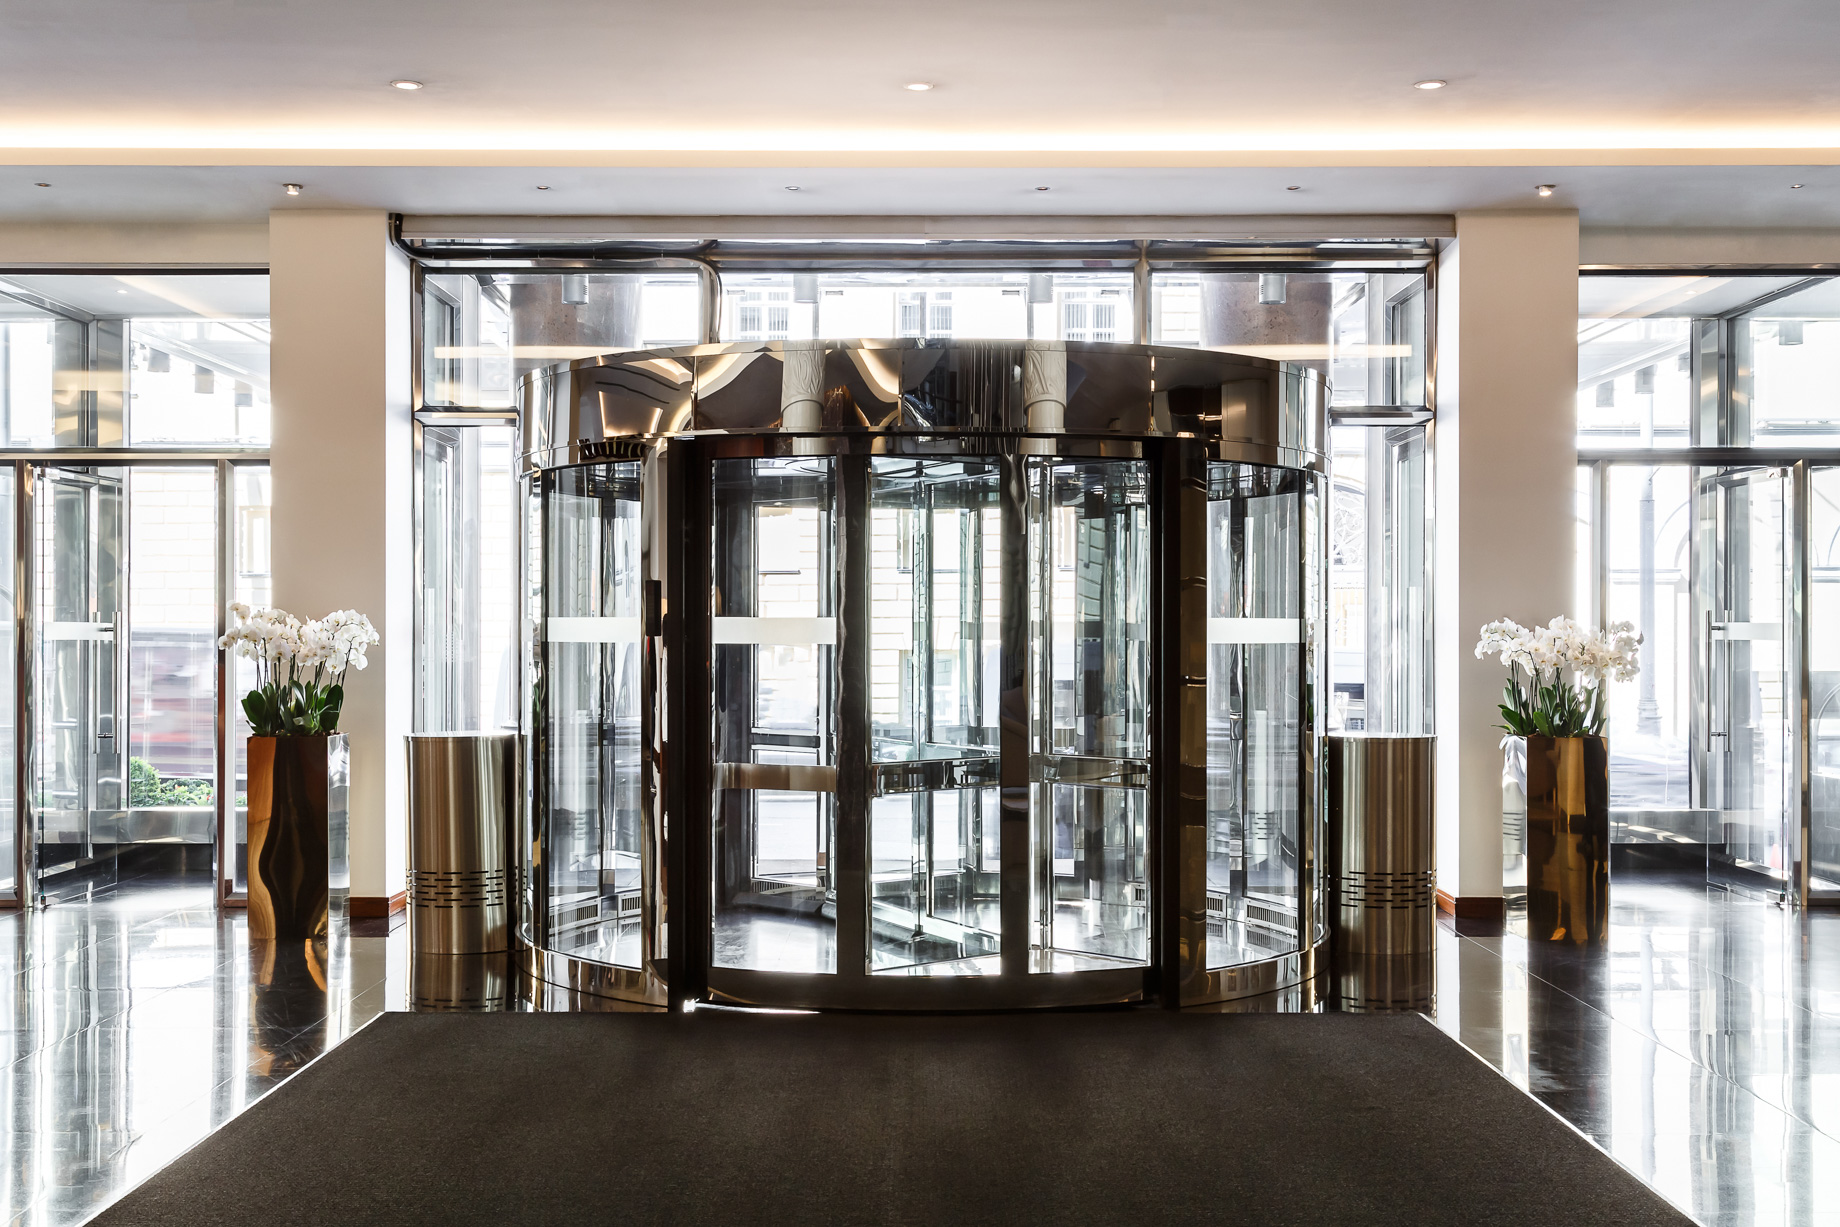 Ararat Park Hyatt Moscow Hotel - Moscow, Russia - Front Entrance Interior